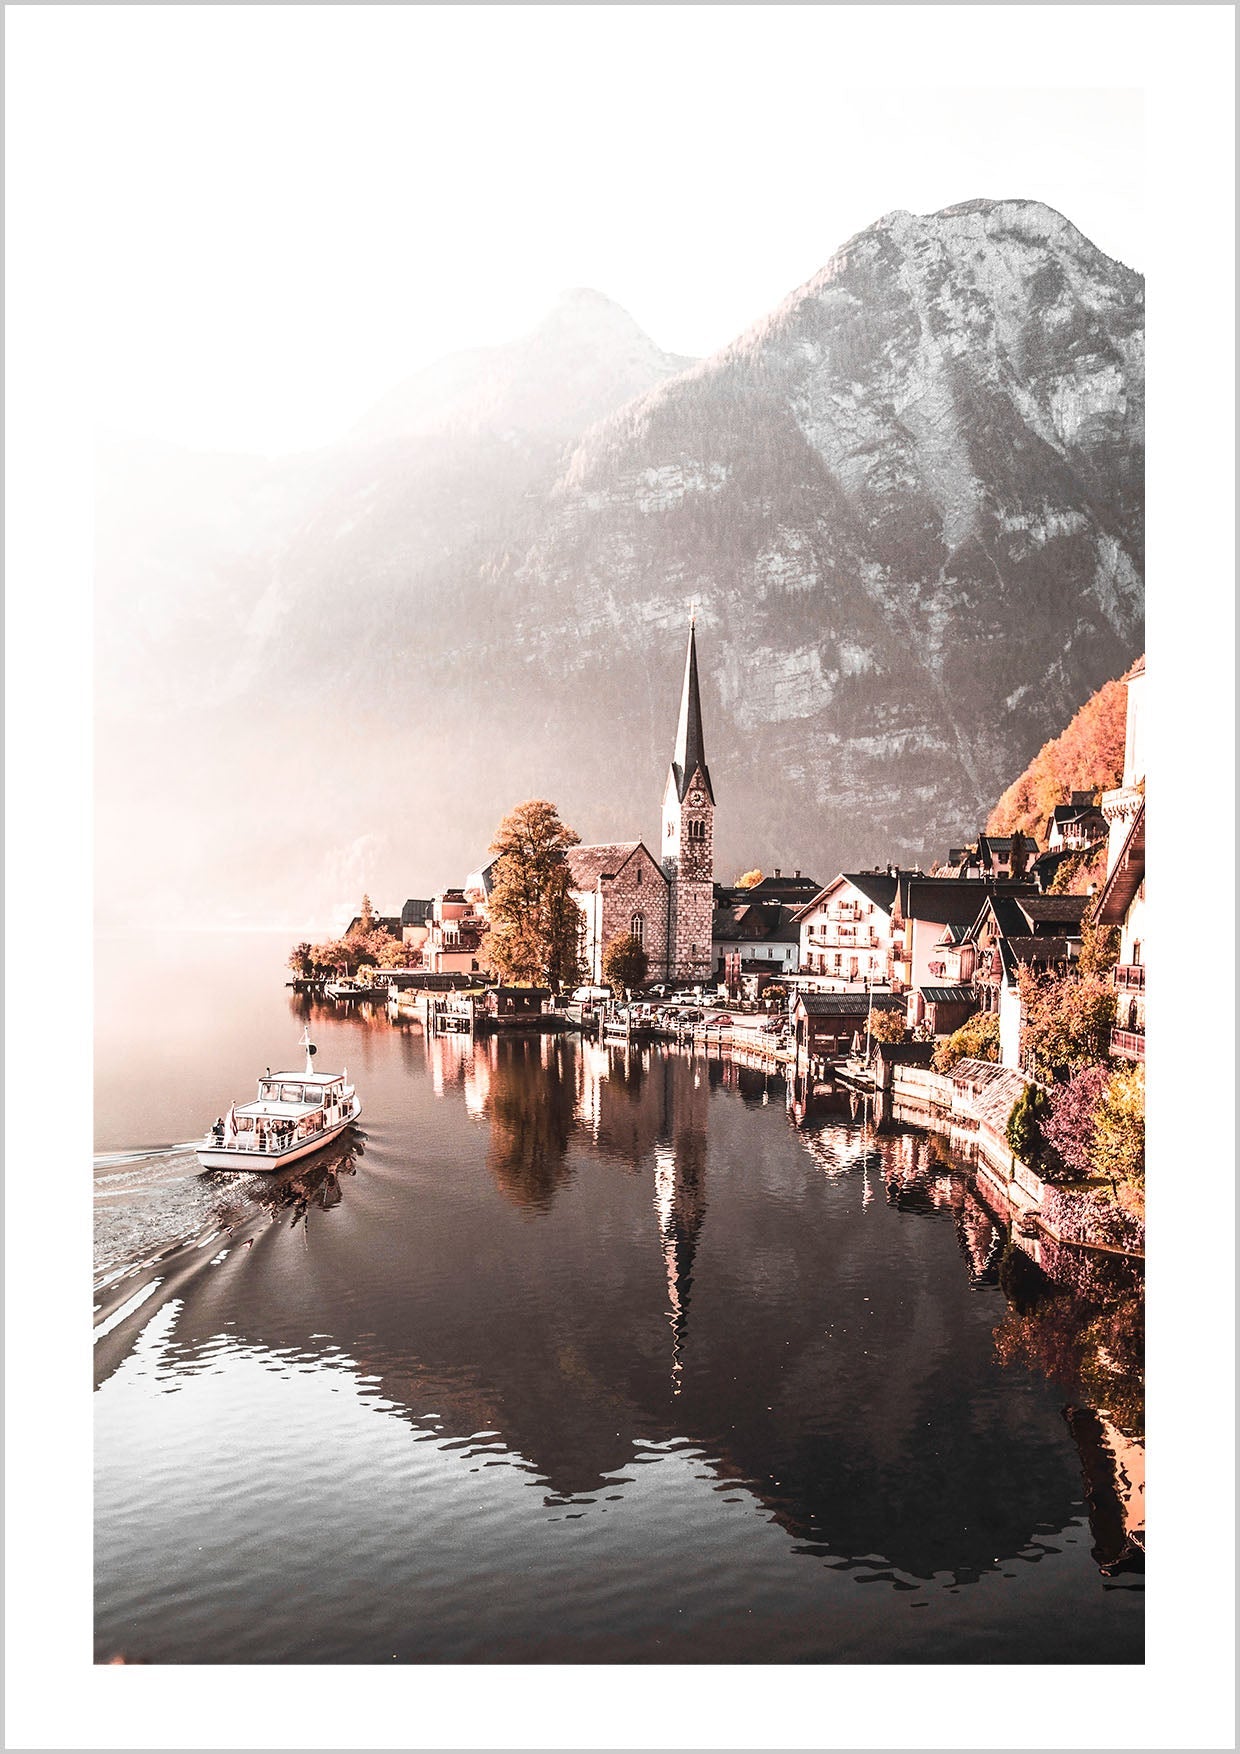 Photography of Hallstatt Town, Styria, Austria. With snow-capped mountains in the background. A boat is arriving at the village